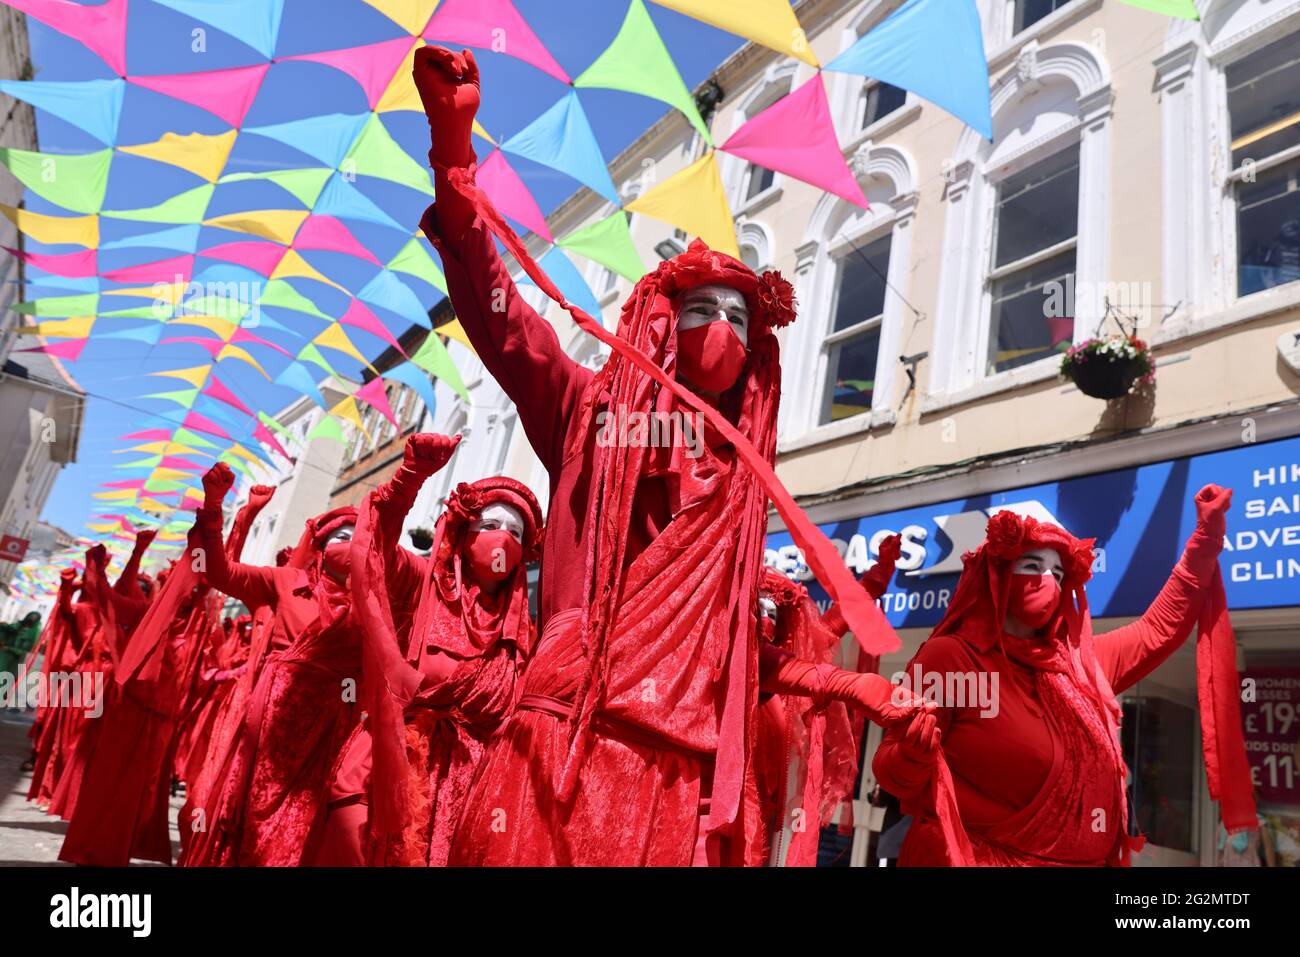 The Red Brigade activists attend an Extinction Rebellion demonstration in Falmouth, during the G7 summit in Cornwall, Britain, June 12, 2021. REUTERS/Tom Nicholson Stock Photo